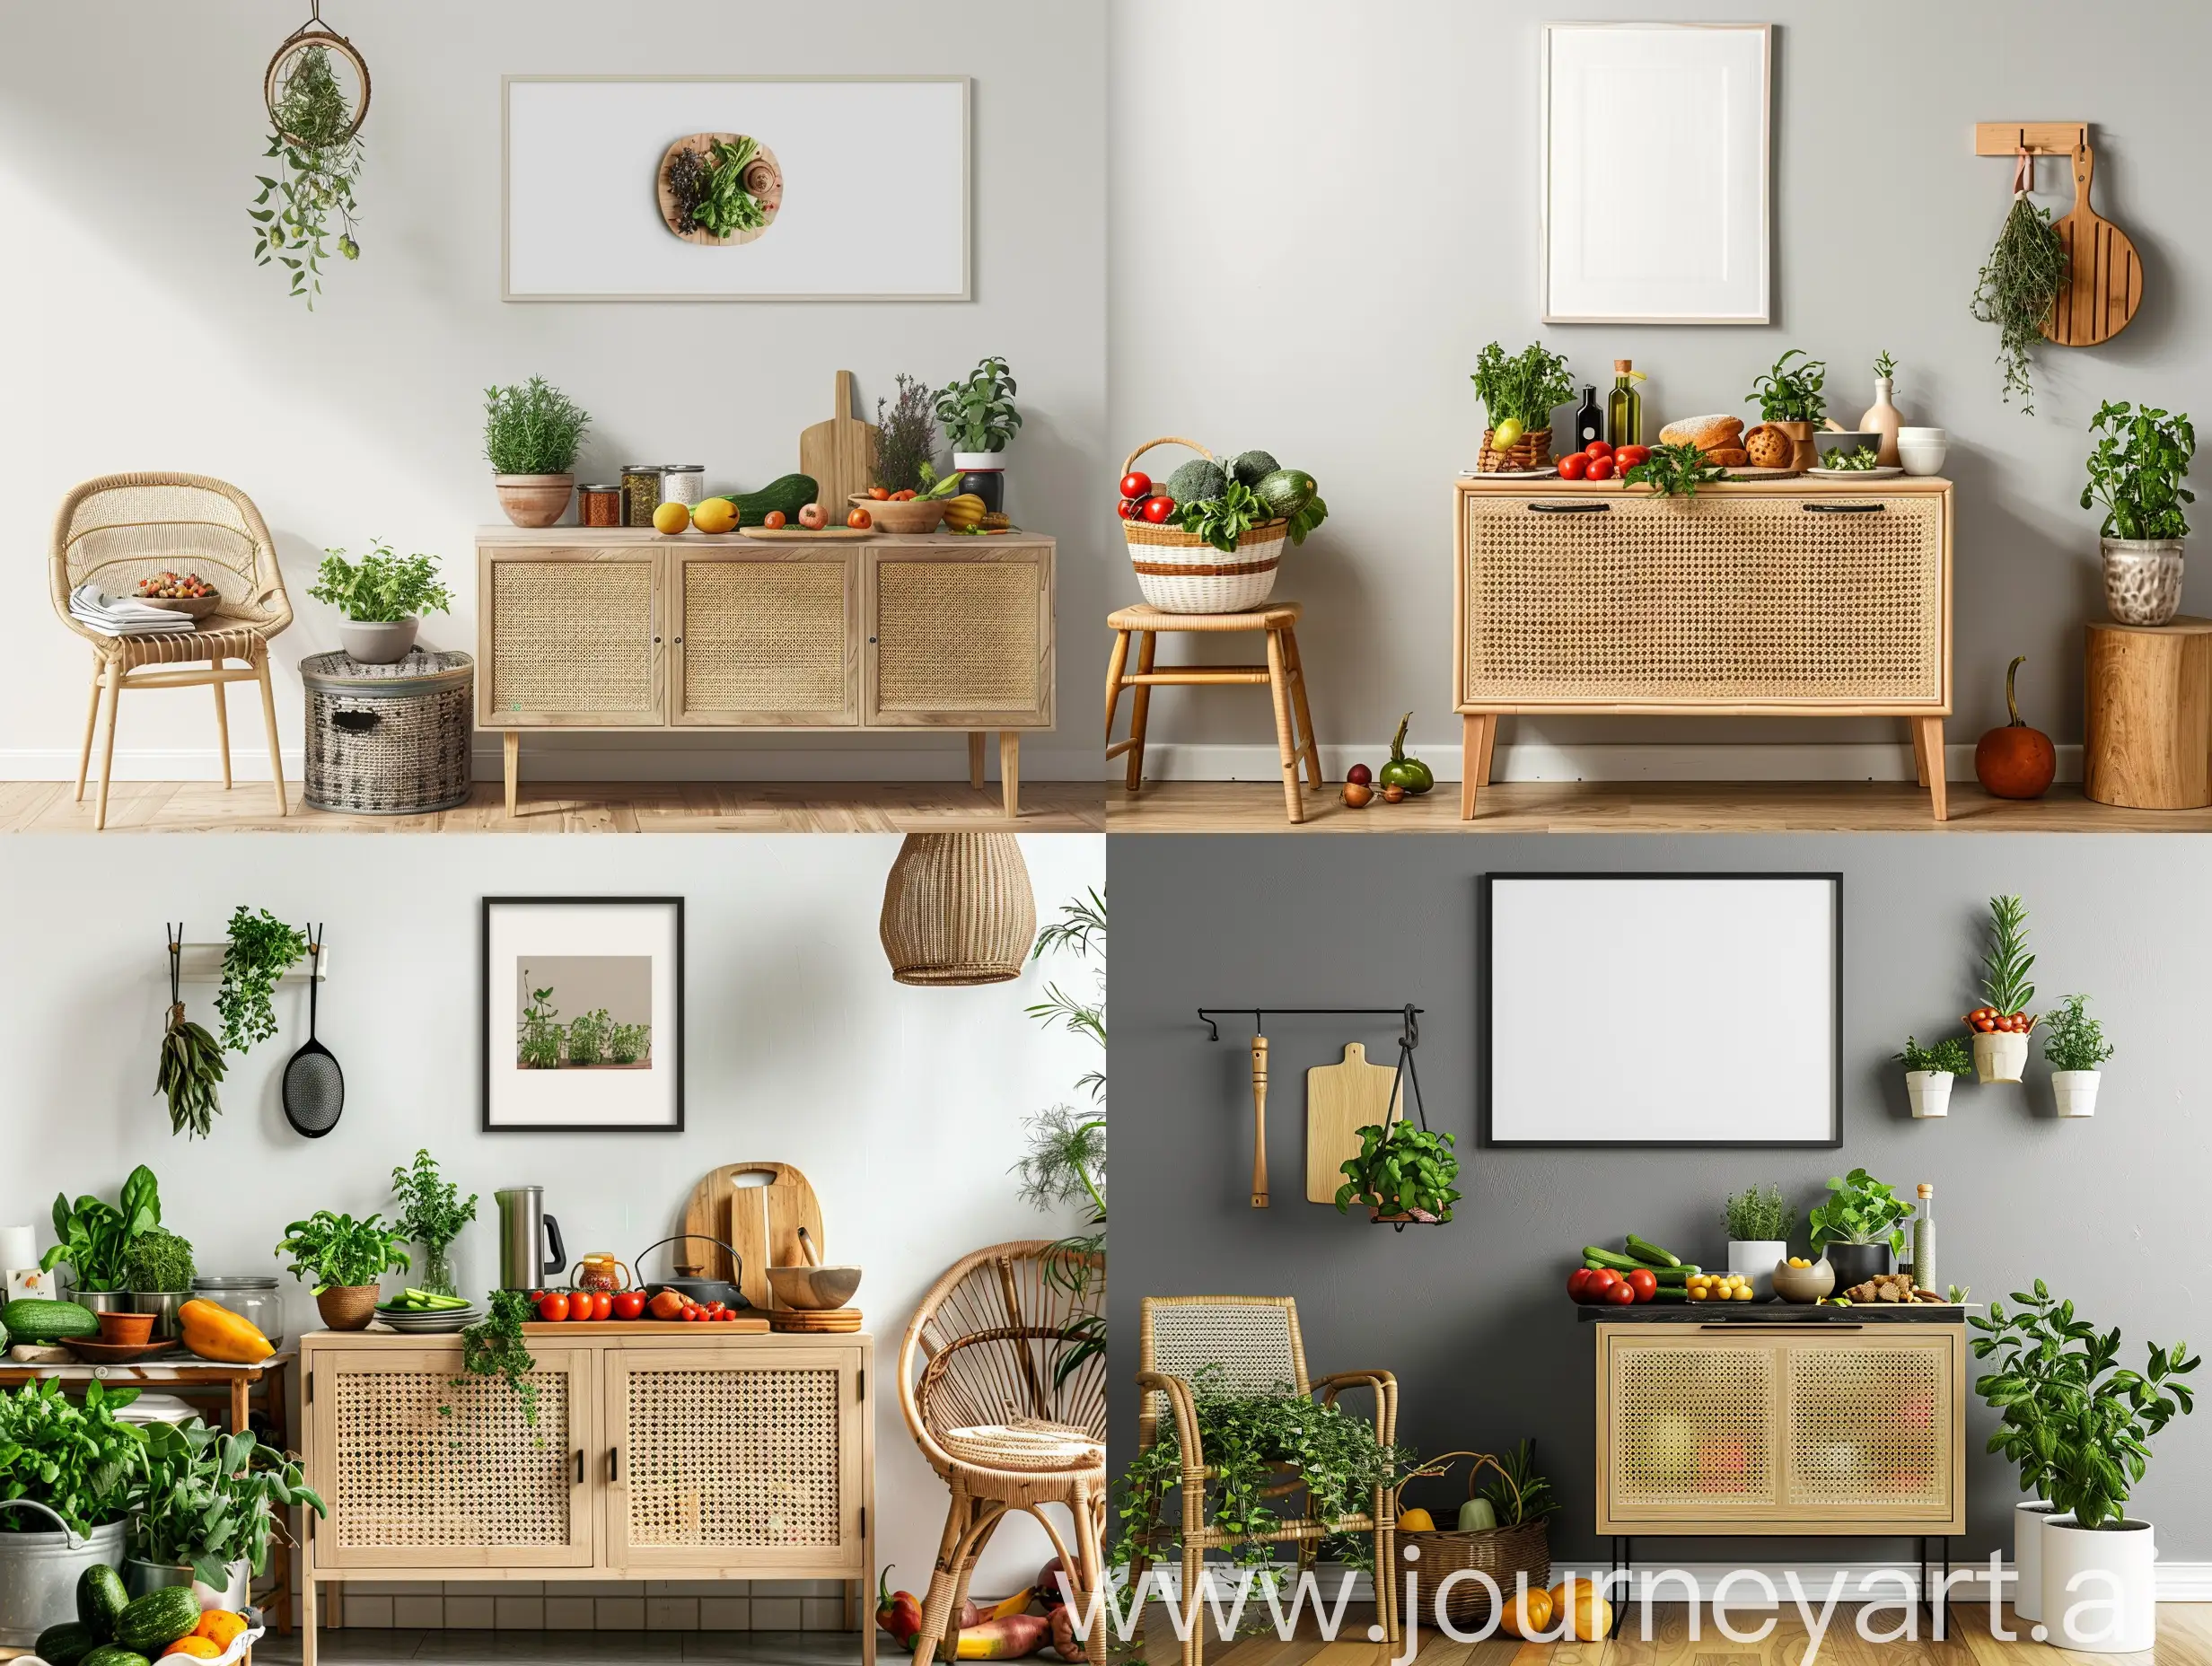 Modern-Kitchen-Interior-Design-with-Rattan-Commode-and-Fresh-Herb-Decor